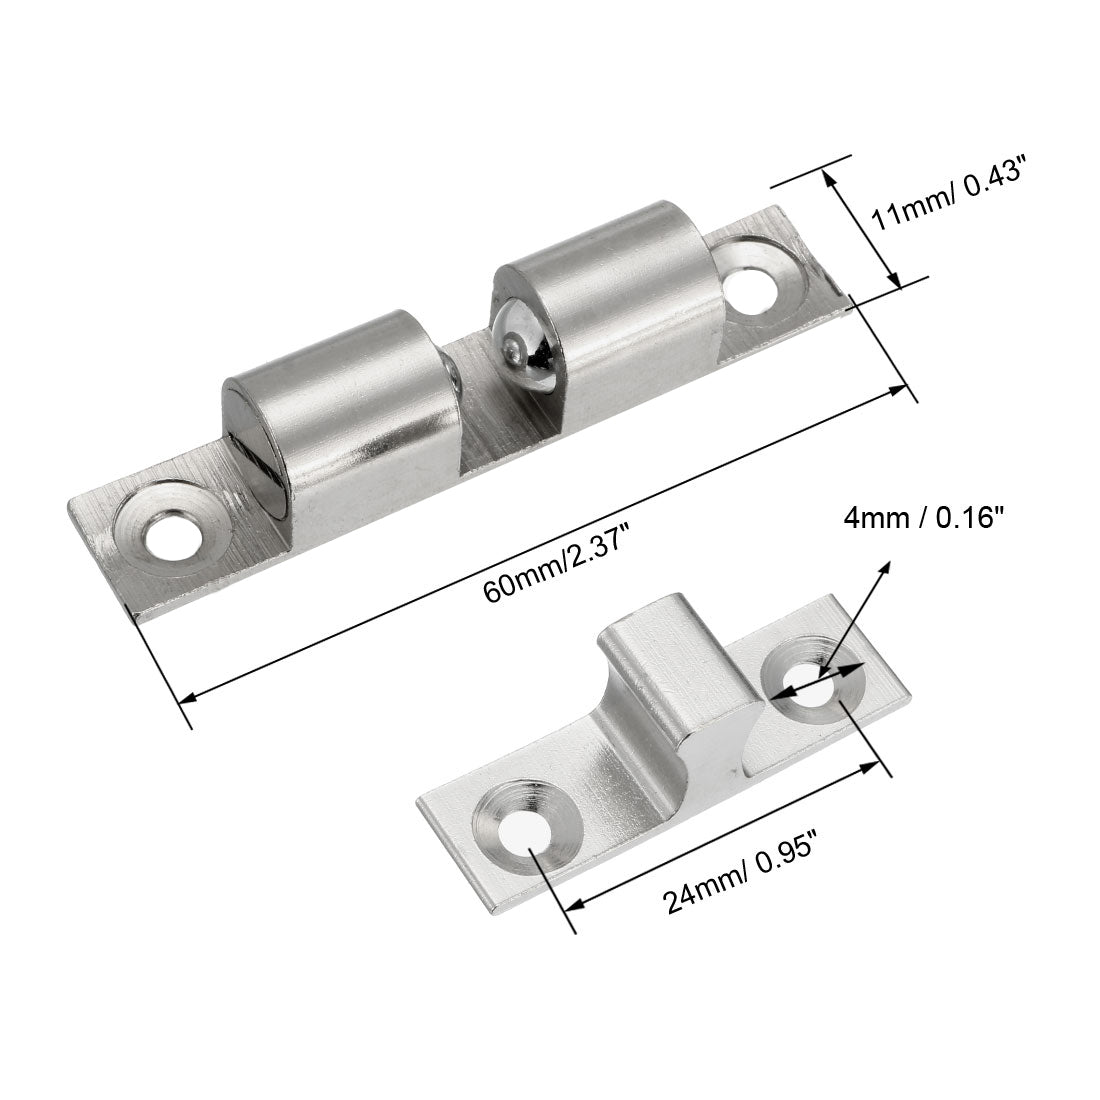 uxcell Uxcell Cabinet Door Closet Brass Double Ball Catch Tension Latch 60mmL Silver Tone